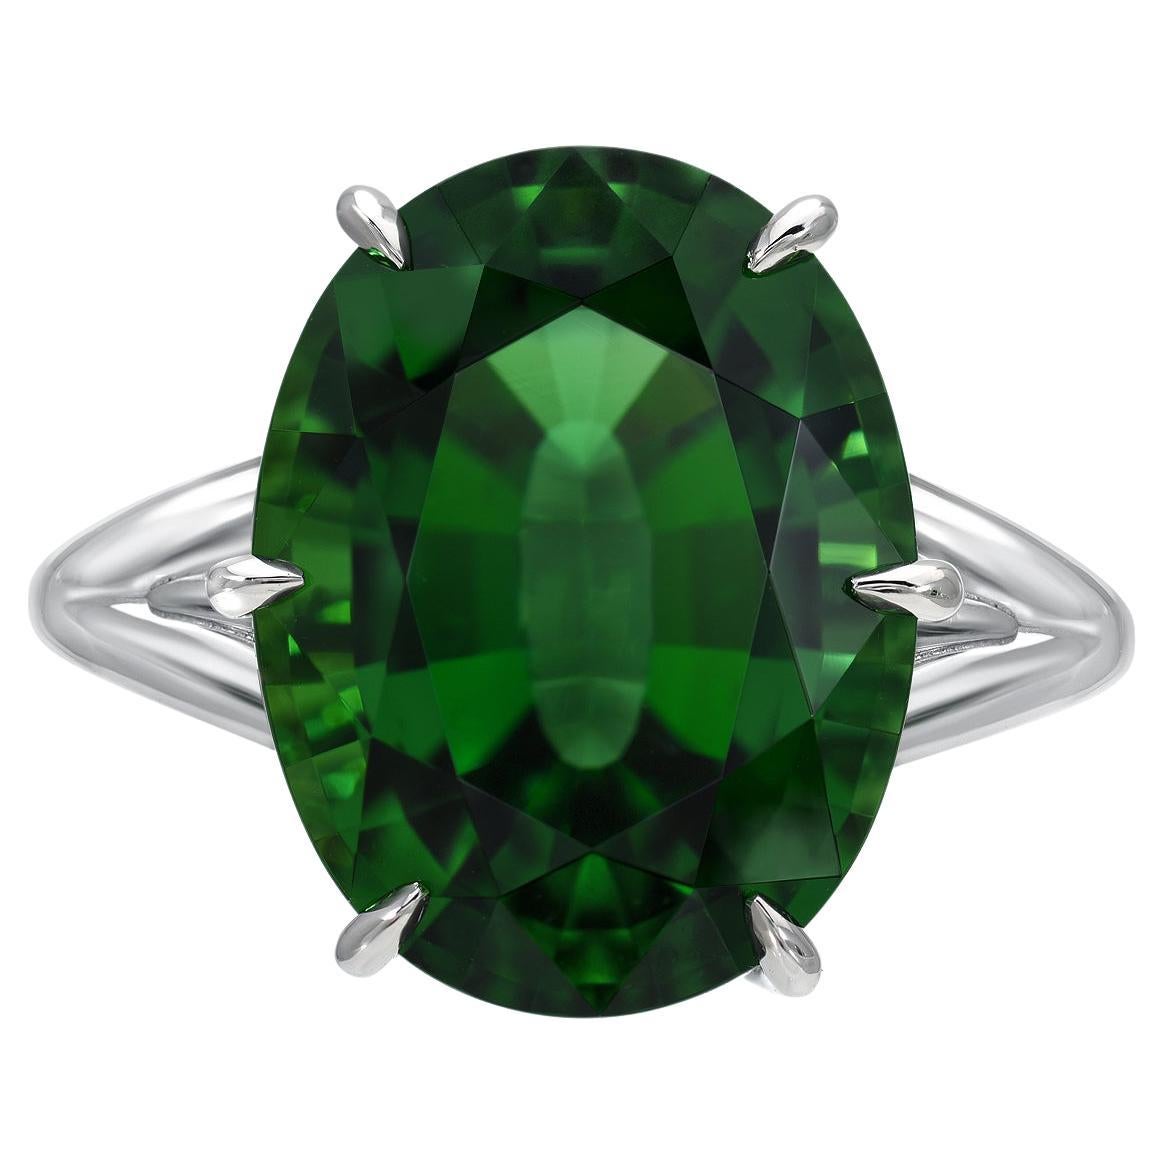 This rare and exceptional 7.70 carat Chrome Tourmaline oval, is set in a ultra fine 6 claw prong setting, and adorned by a total of 0.26 carat round brilliant diamonds, to compose this hand crafted platinum ring. This gem exhibits superior color,